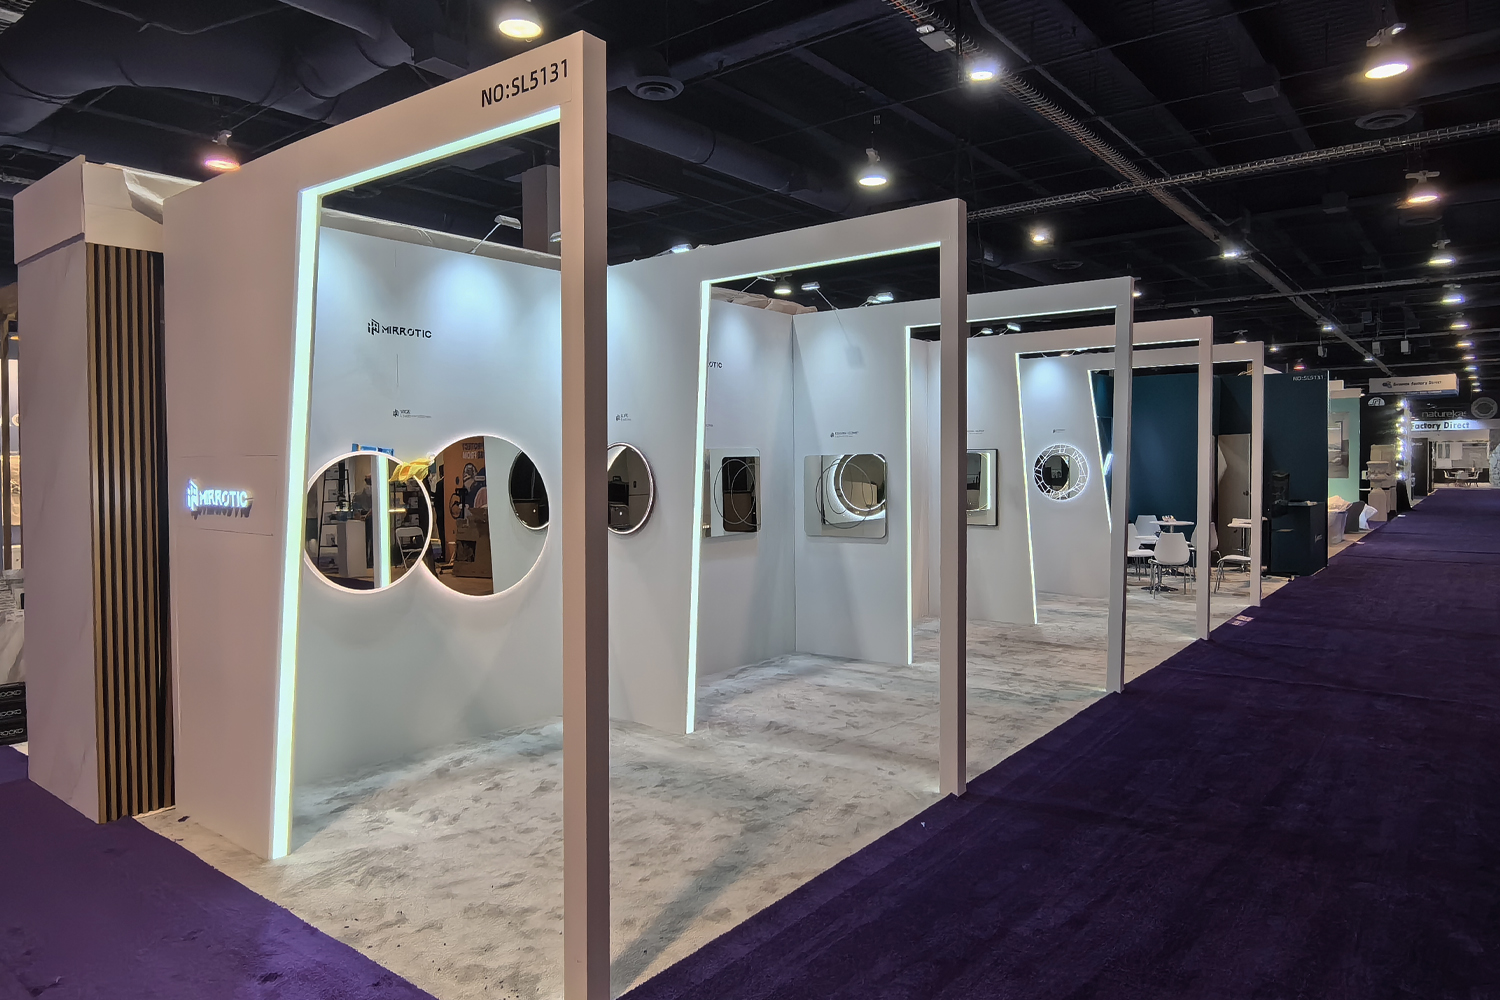 Exciting Happenings at the Ongoing KBIS Exhibition